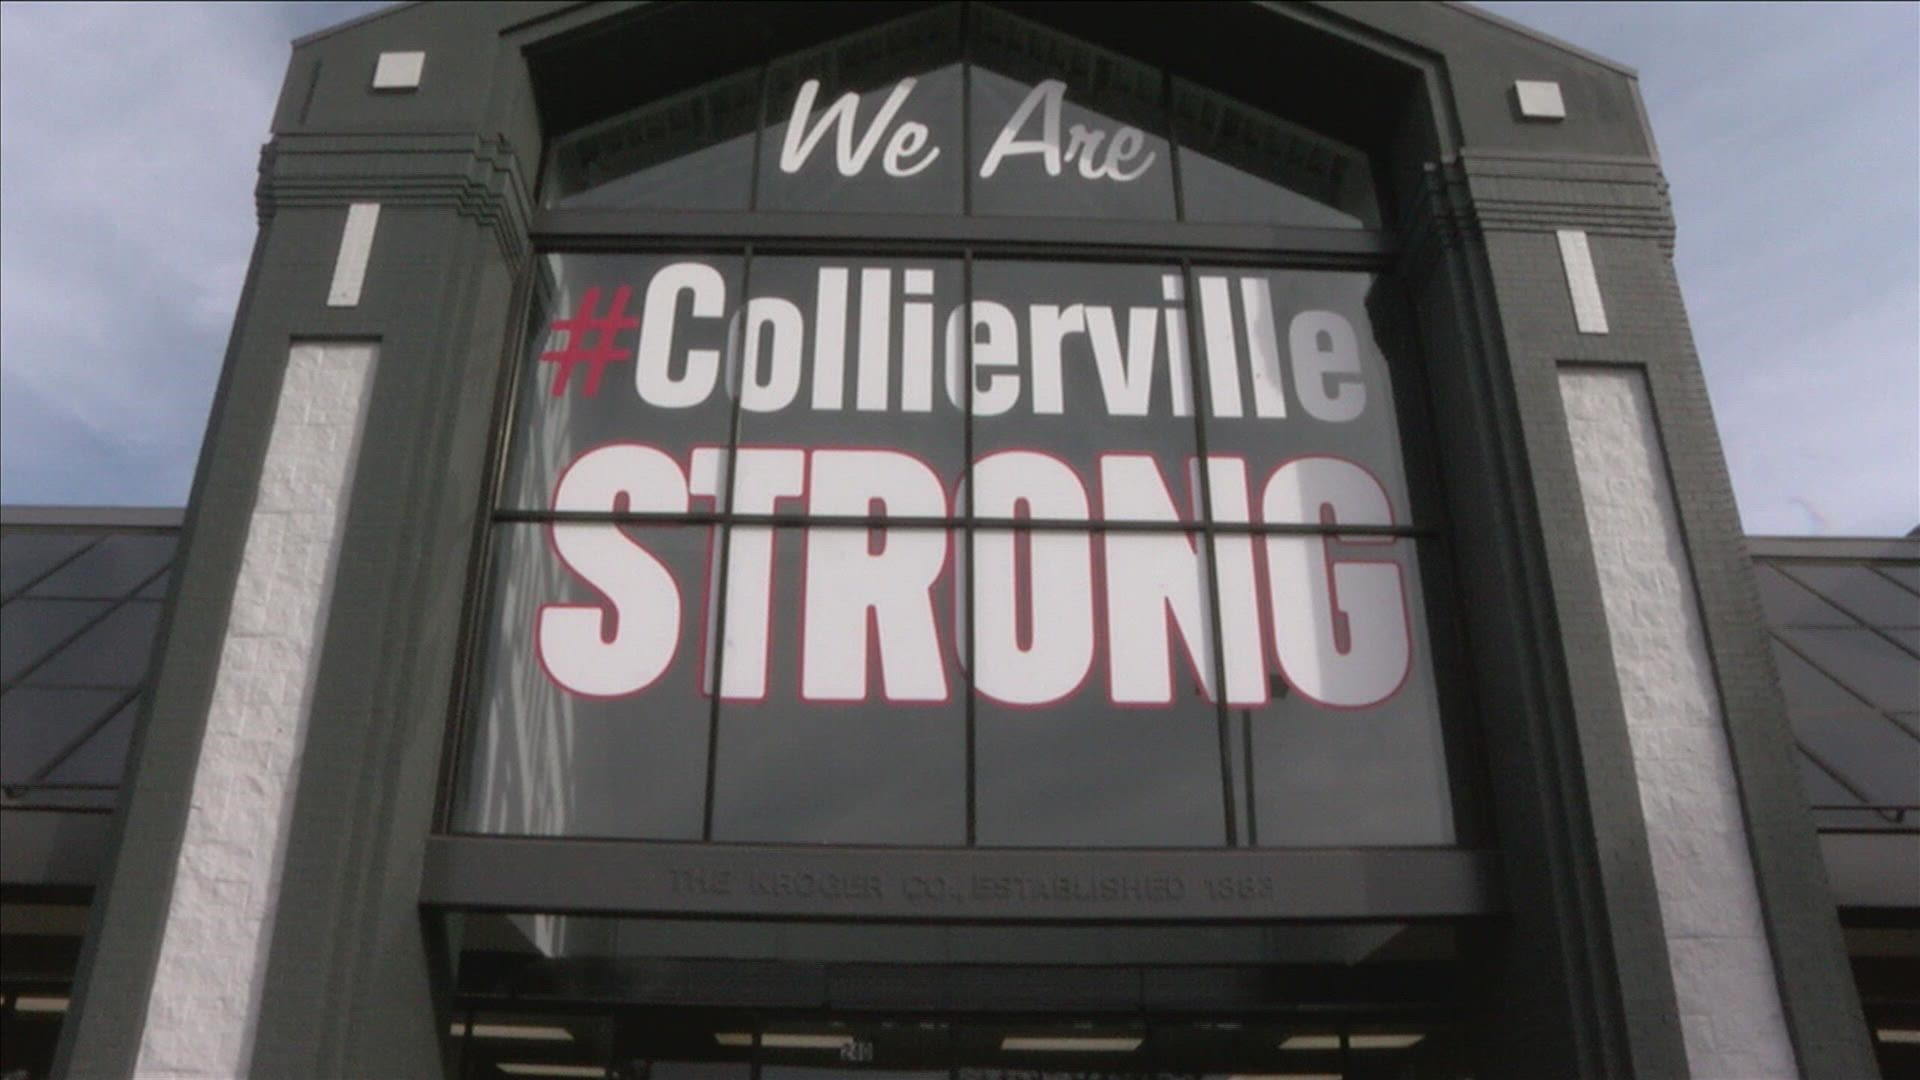 The violence on September 23, 2021, killed one woman and injured 14 others - but it also strengthened the bond between Collierville residents and law enforcement.